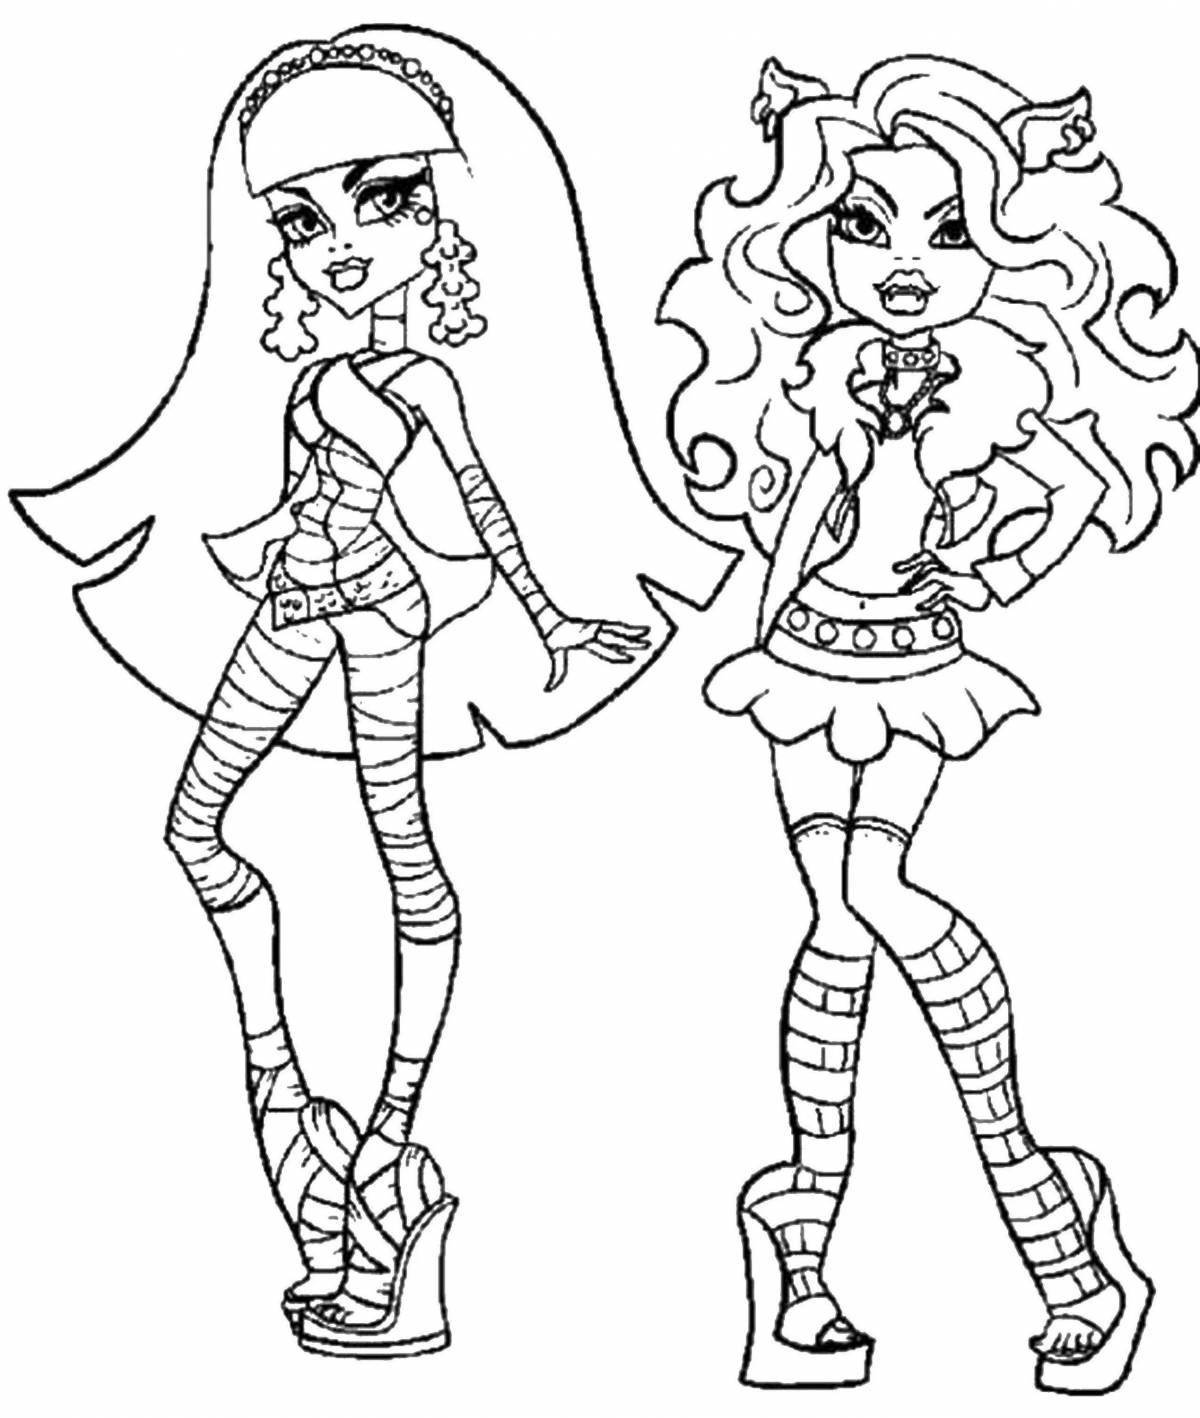 Colorful monster high coloring book for girls